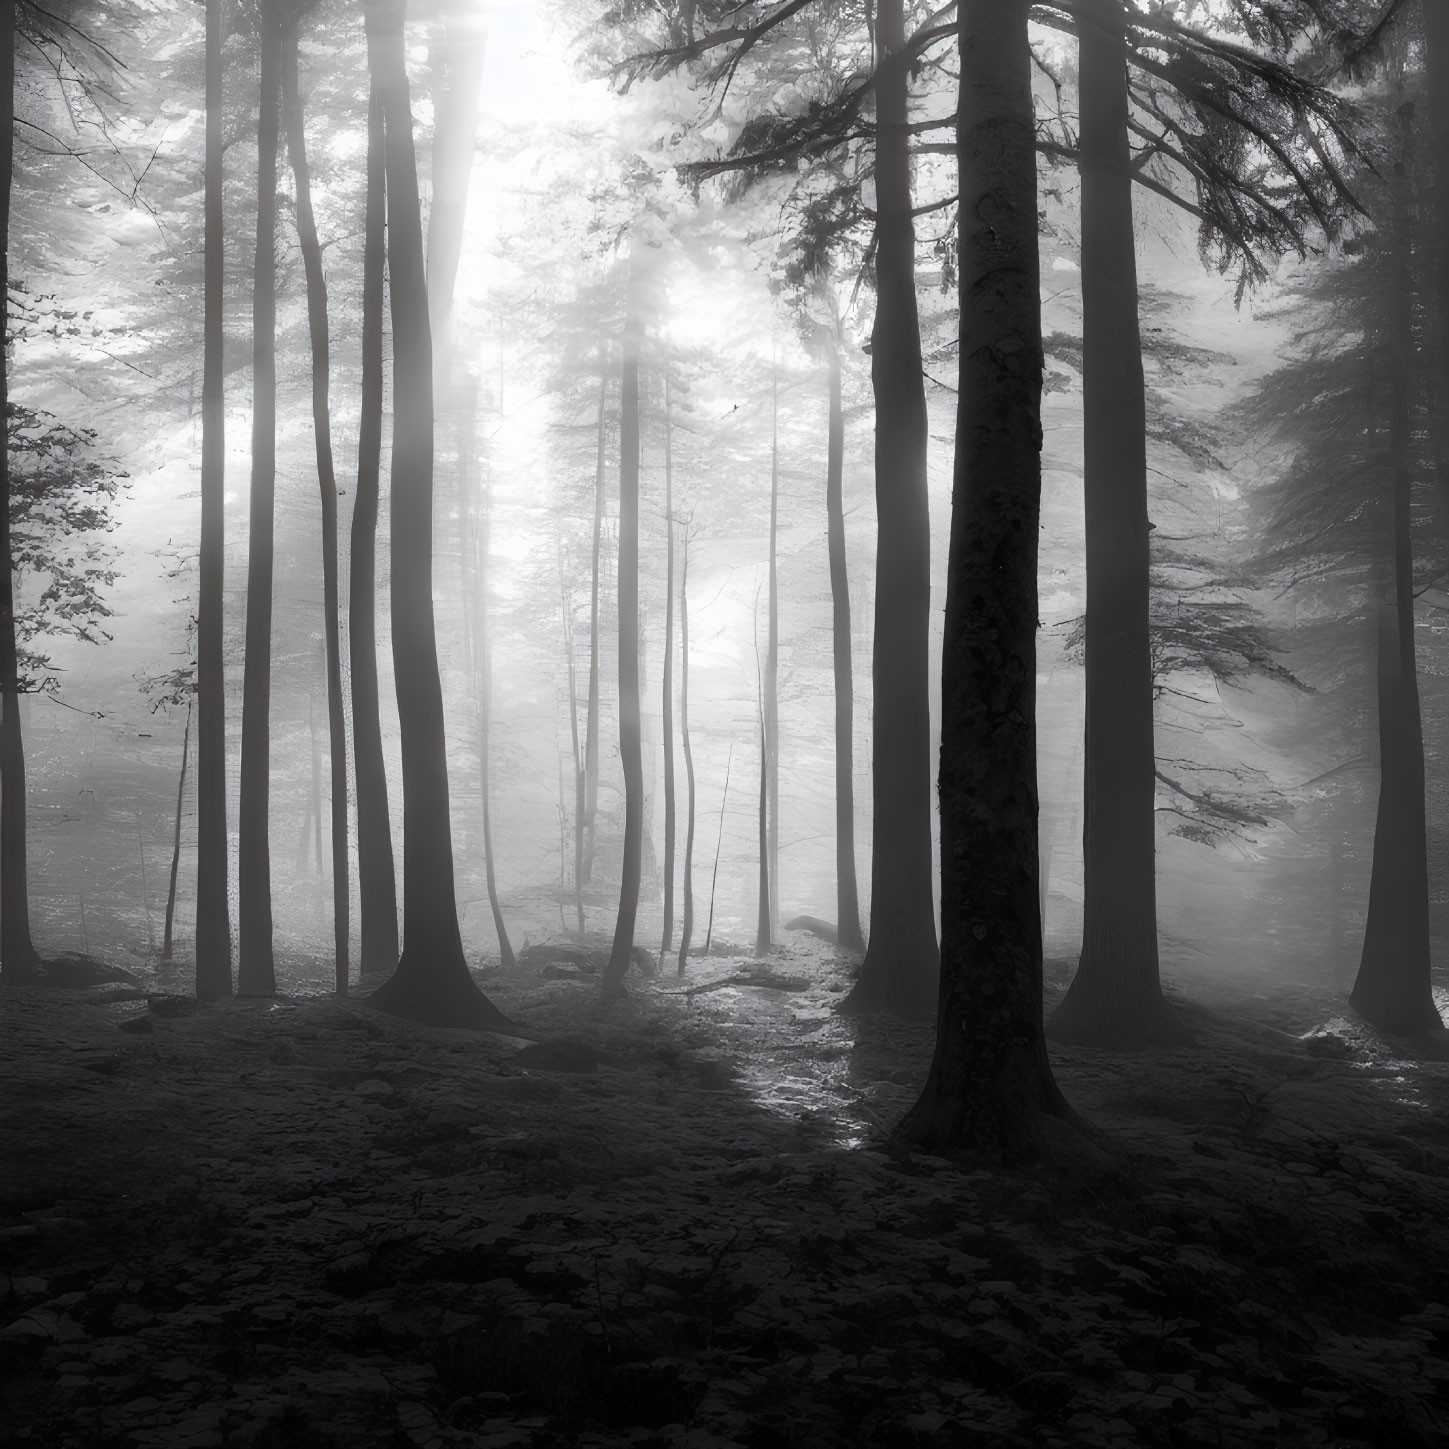 Monochromatic misty forest with tall slender trees